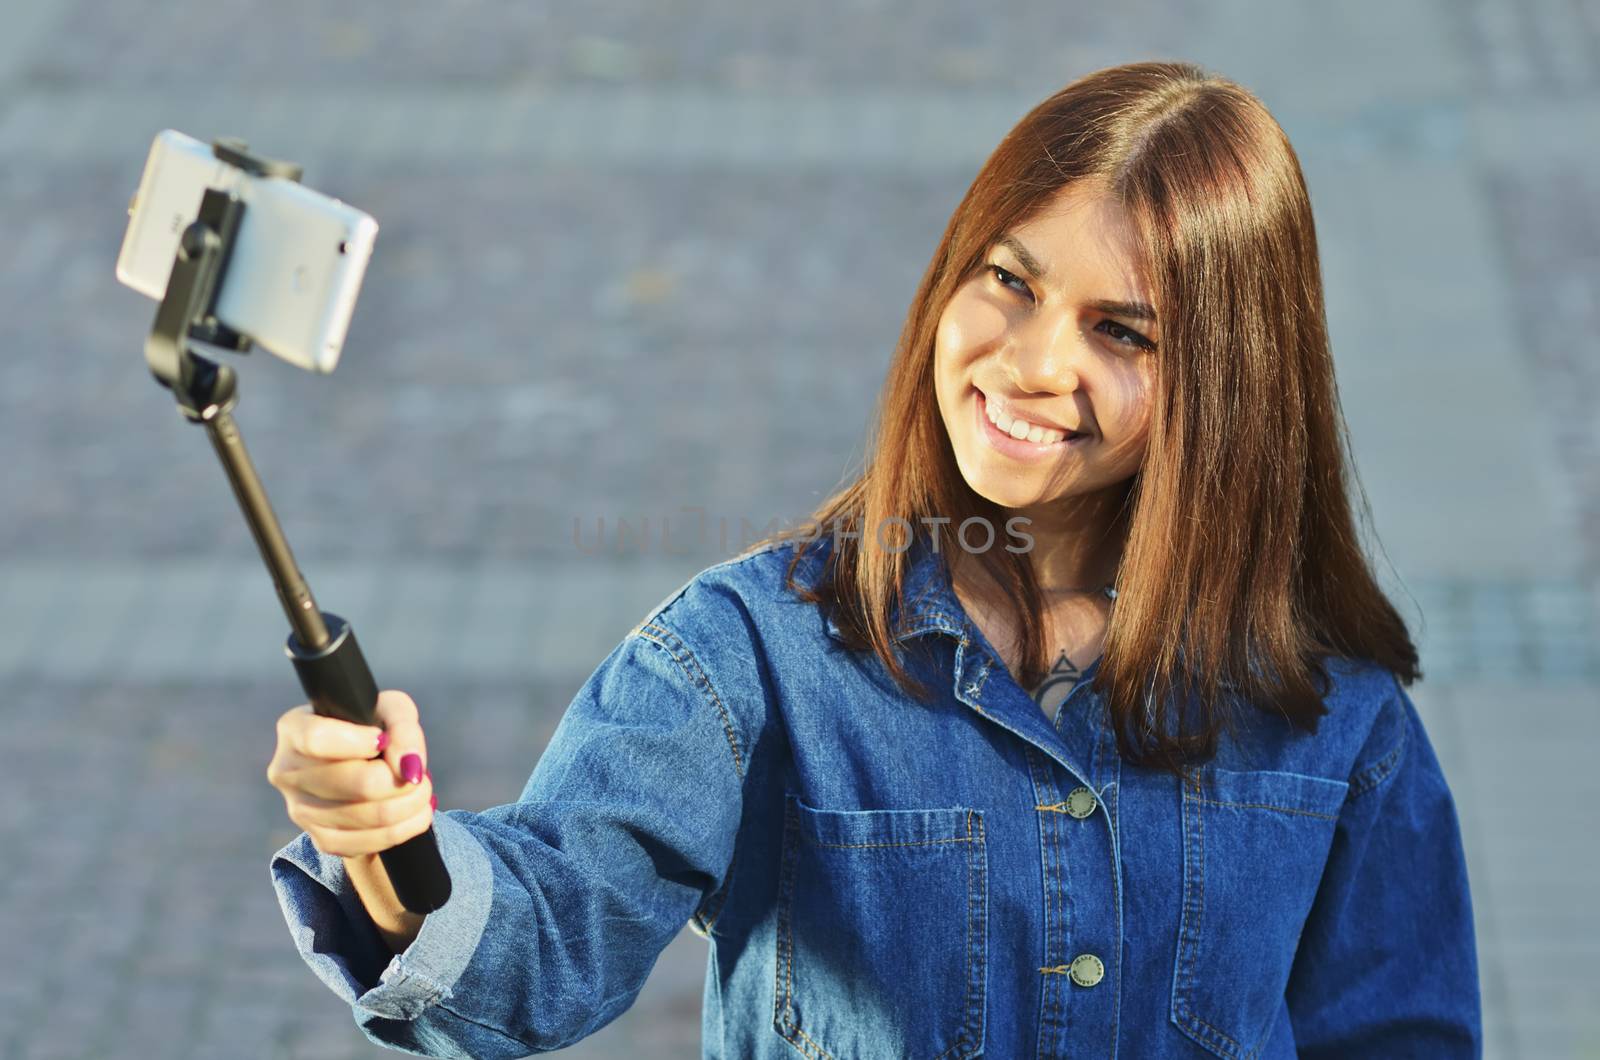 Brunette girl Asian looks in a denim suit takes a selfie and smiles by xzgorik